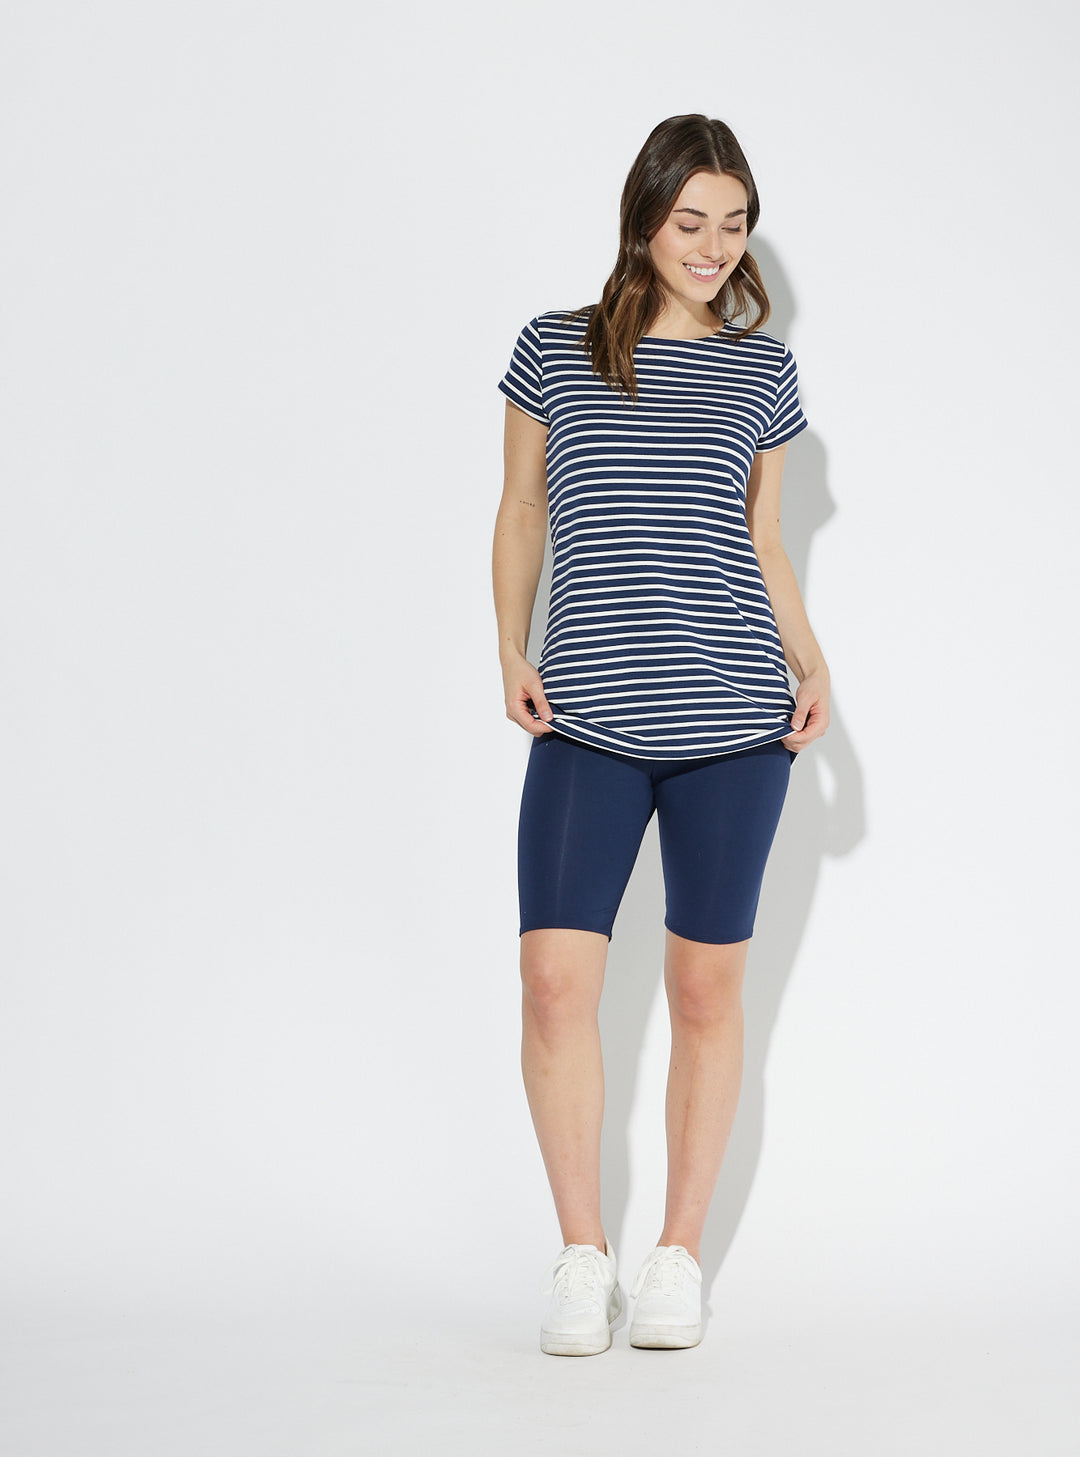 Peony tunic / Navy and white lines